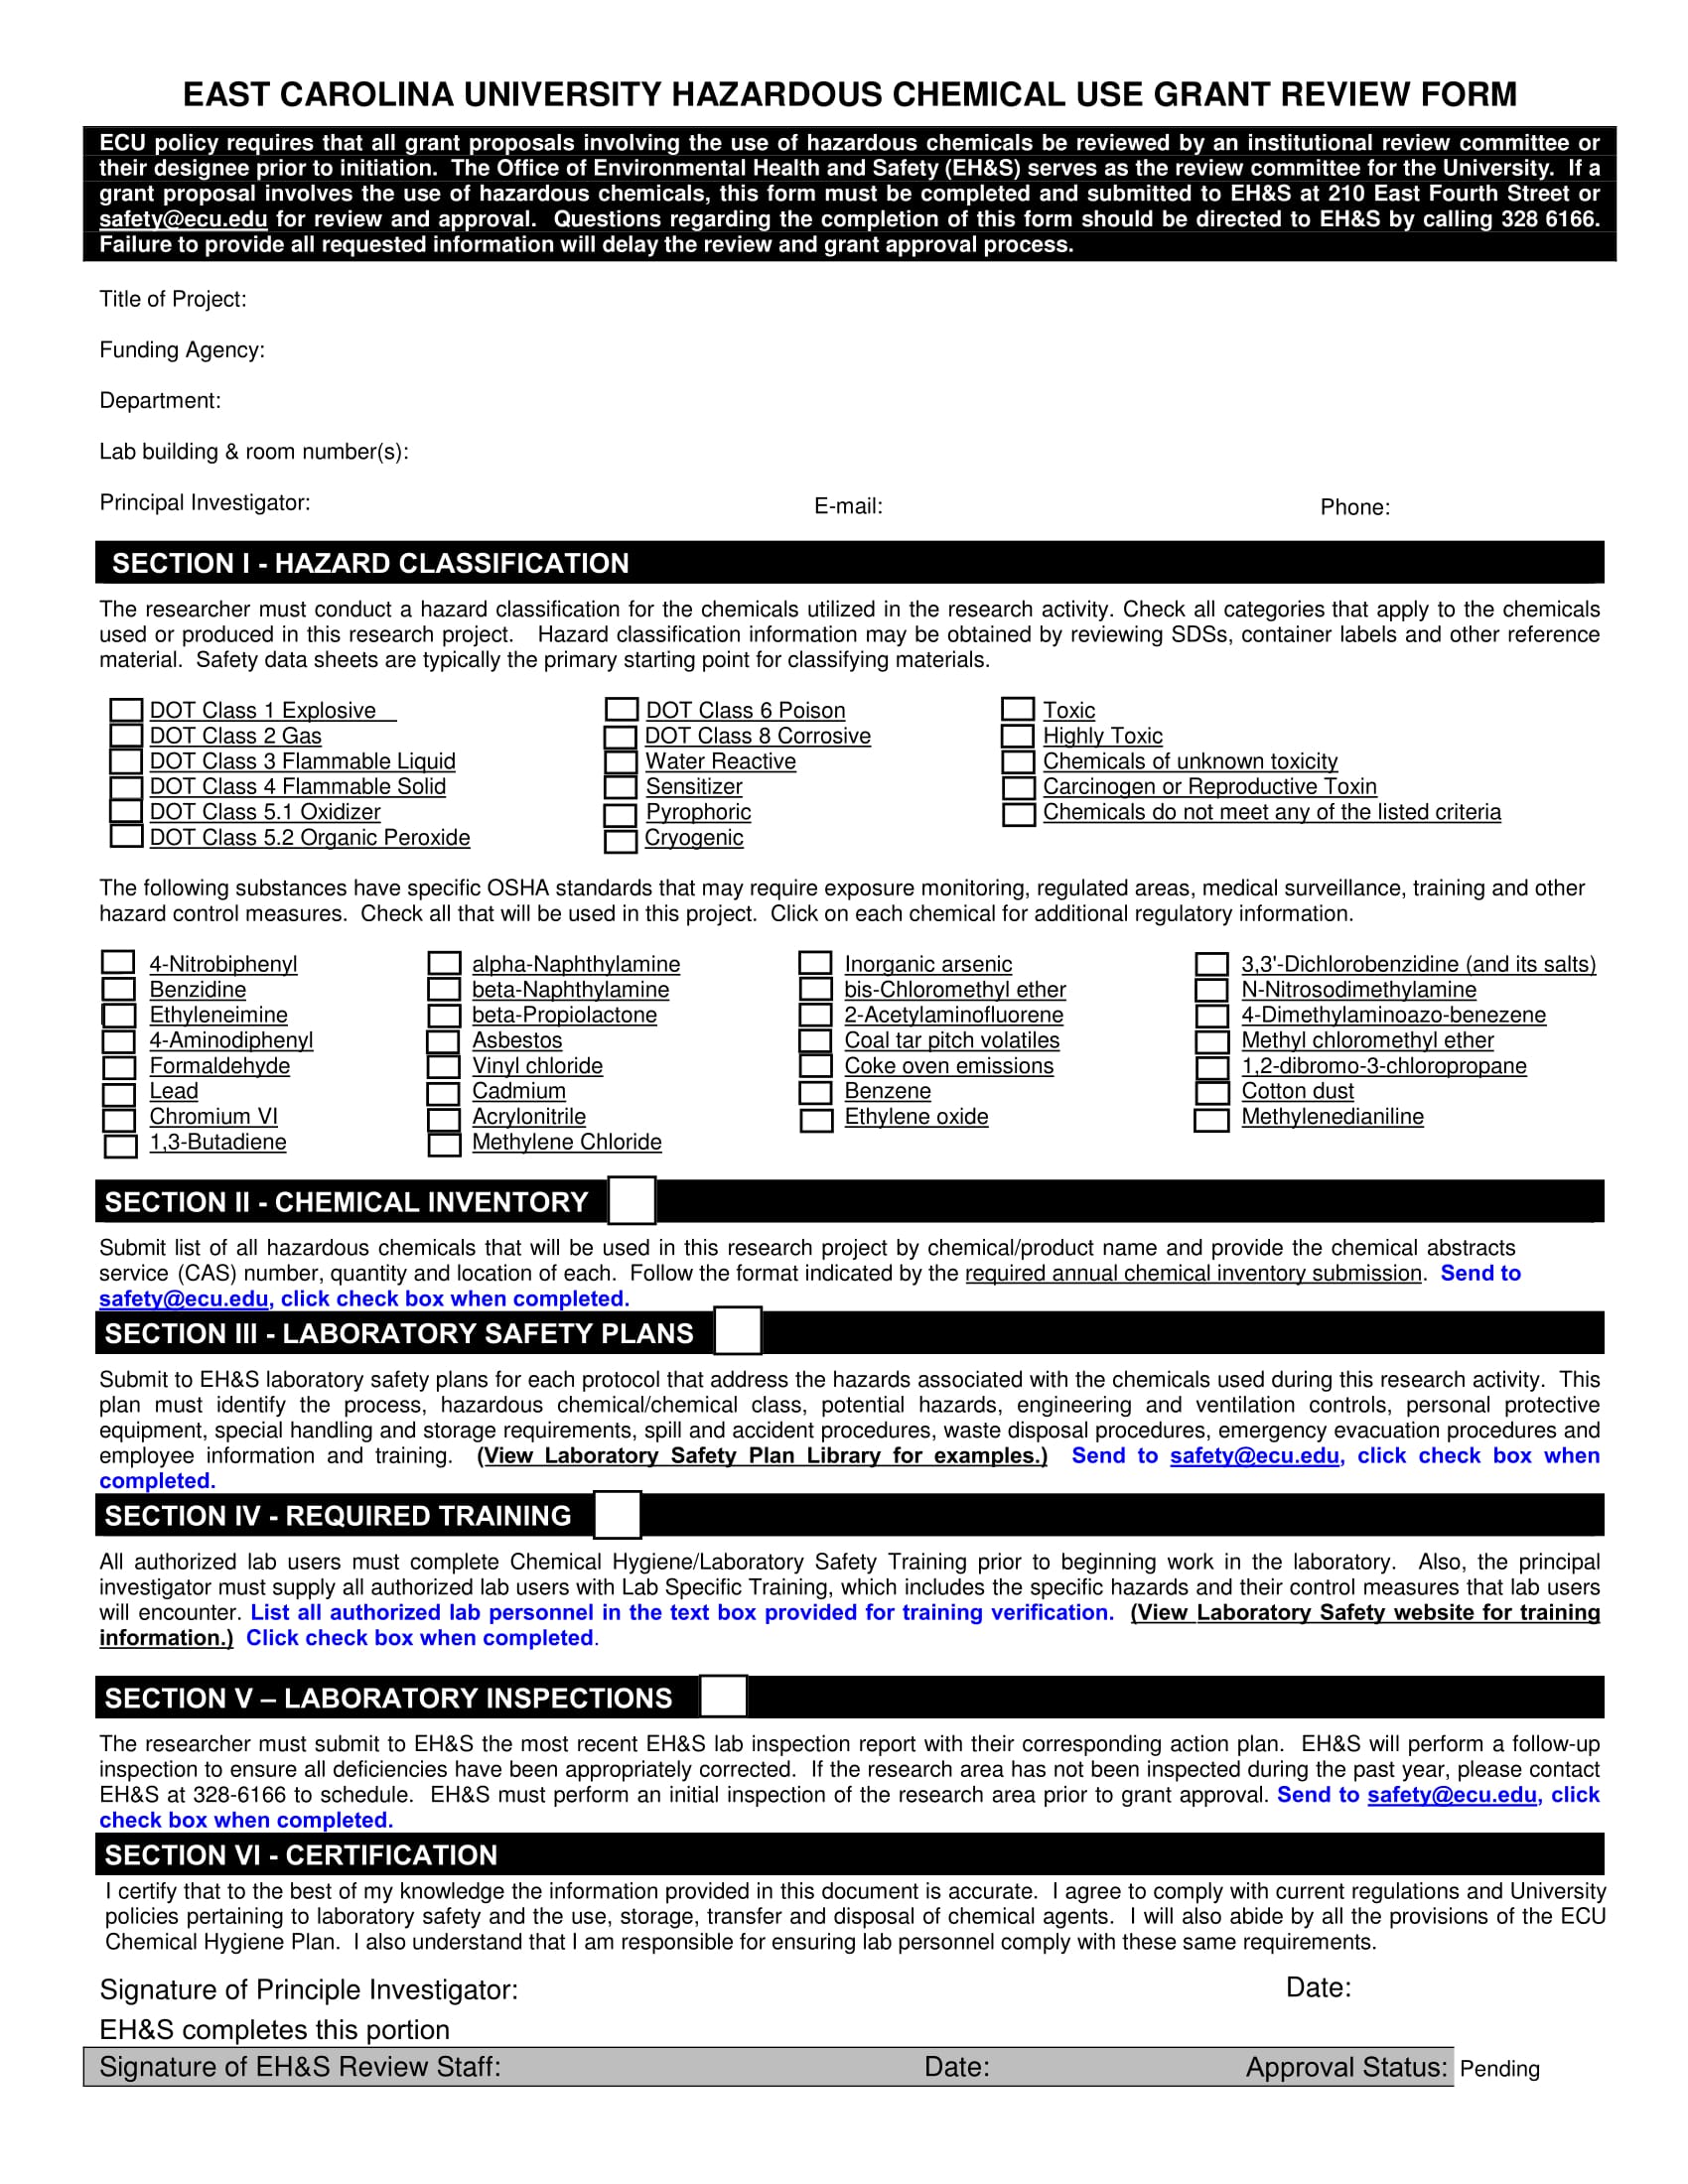 chemical use grant review form 1